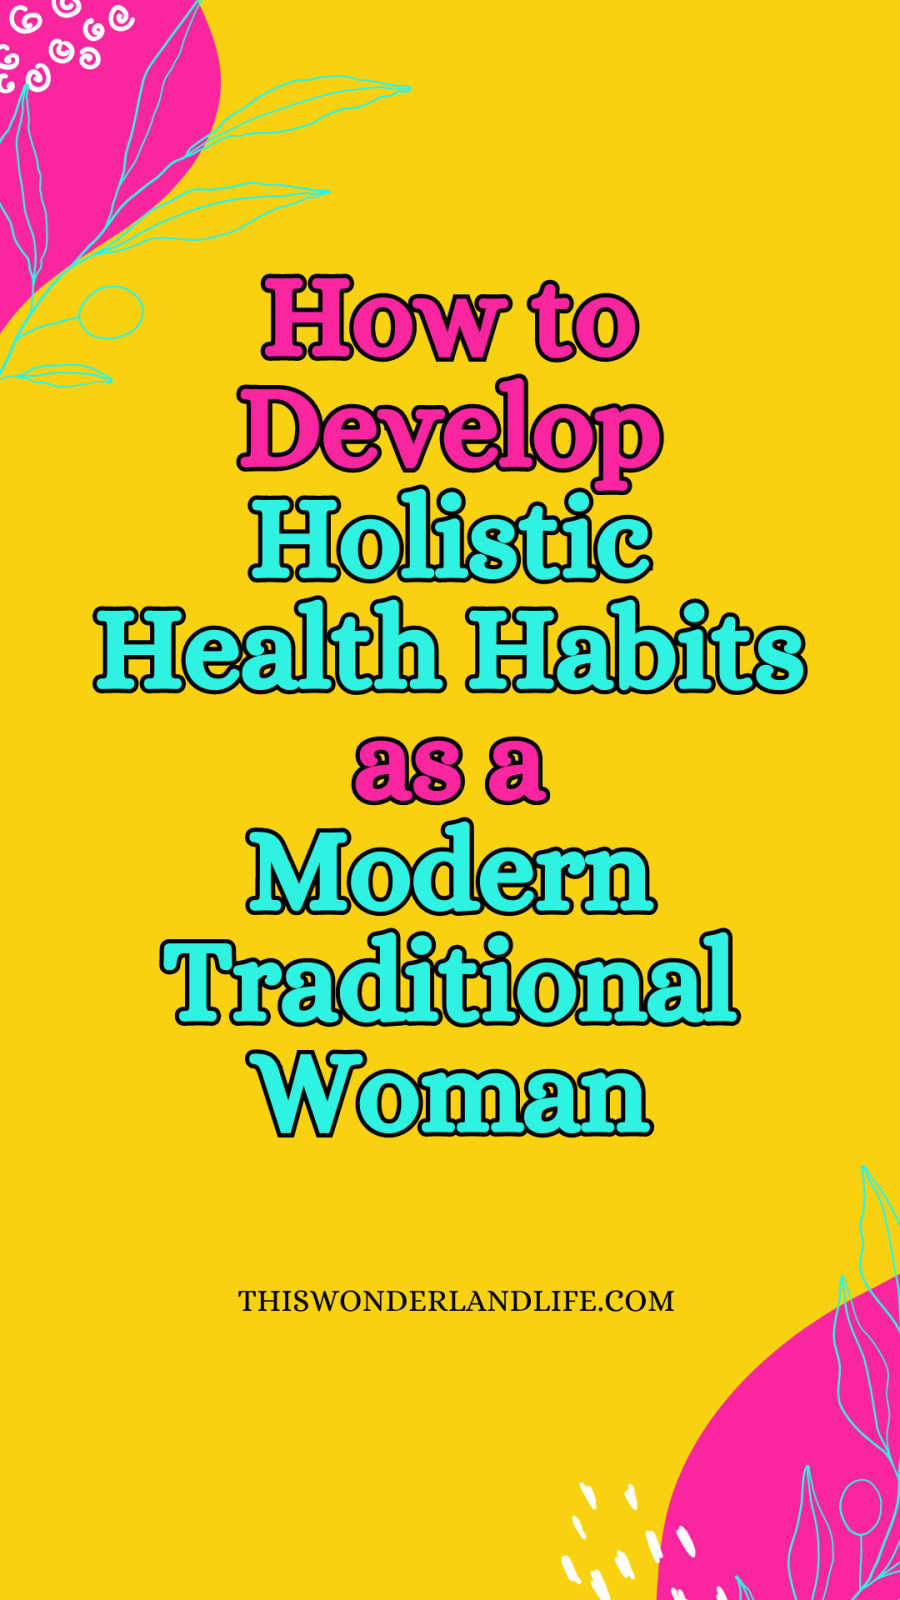 How to Develop Holistic Health Habits as a Modern Traditional Woman